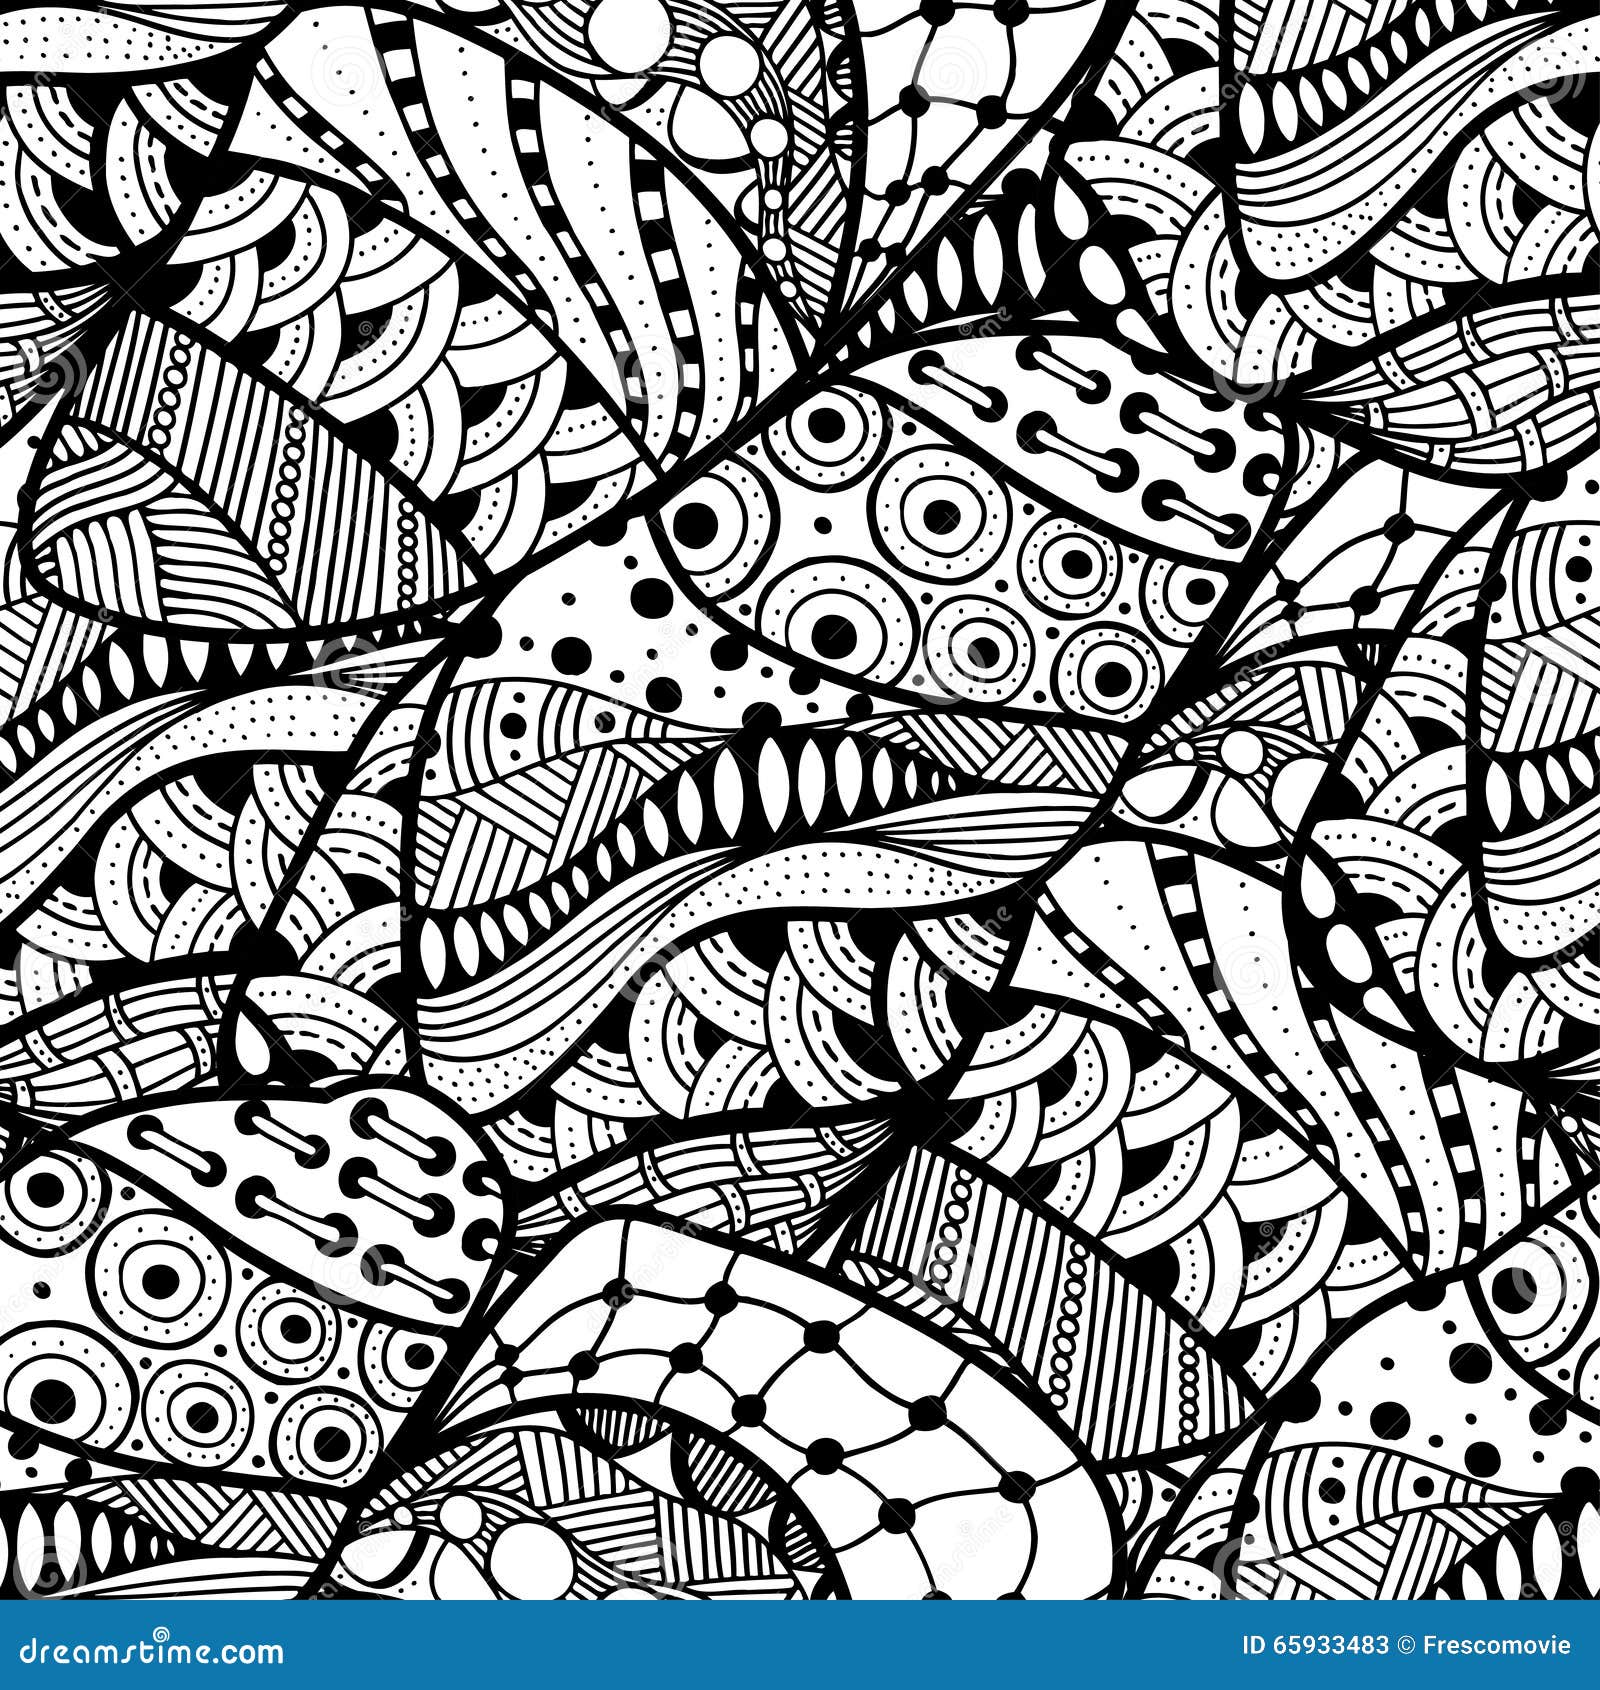 Abstract doodle background stock vector. Illustration of abstract ...